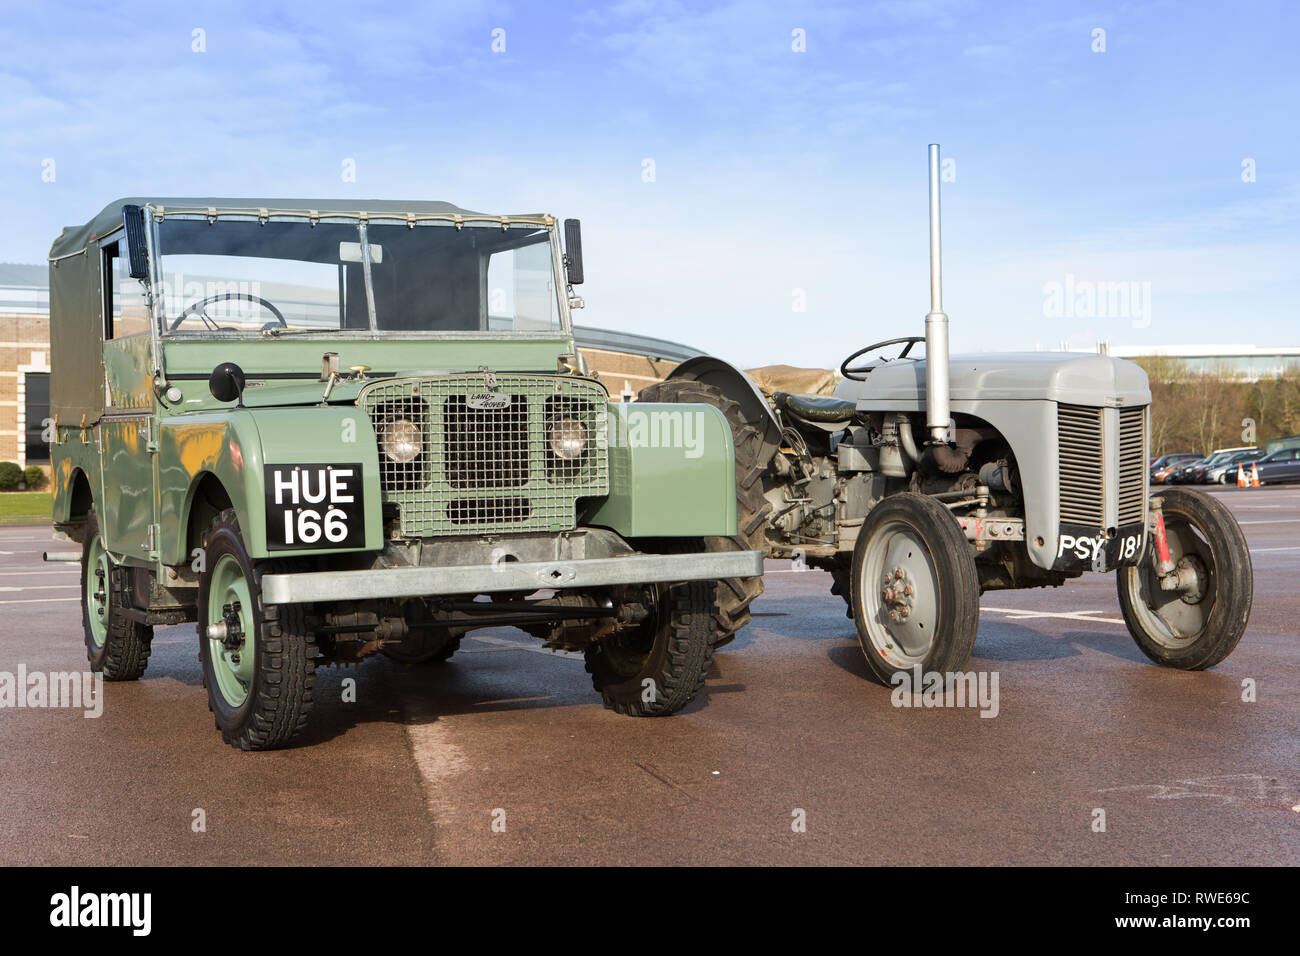 British icons, both, a 1949 series 1 Land Rover together with an iconic grey Ferguson tractor - British Motor Museum Gaydon UK Stock Photo